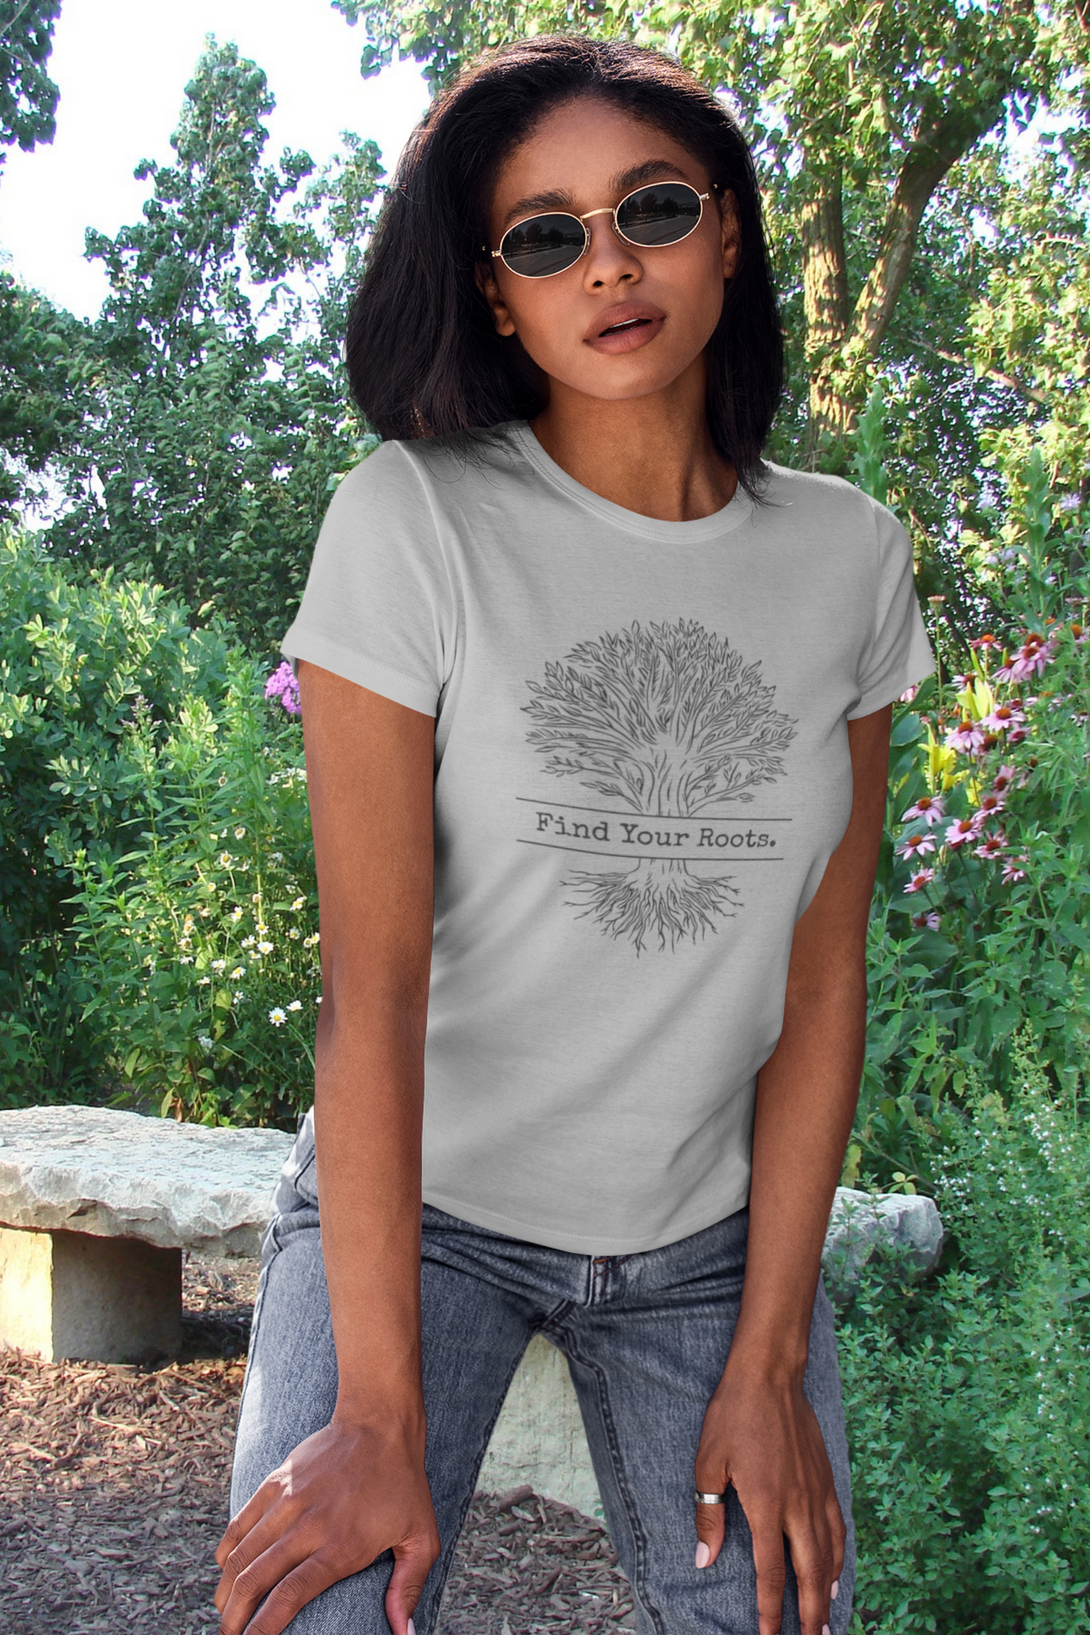 Find Your Roots Printed T-Shirt For Women - WowWaves - 8